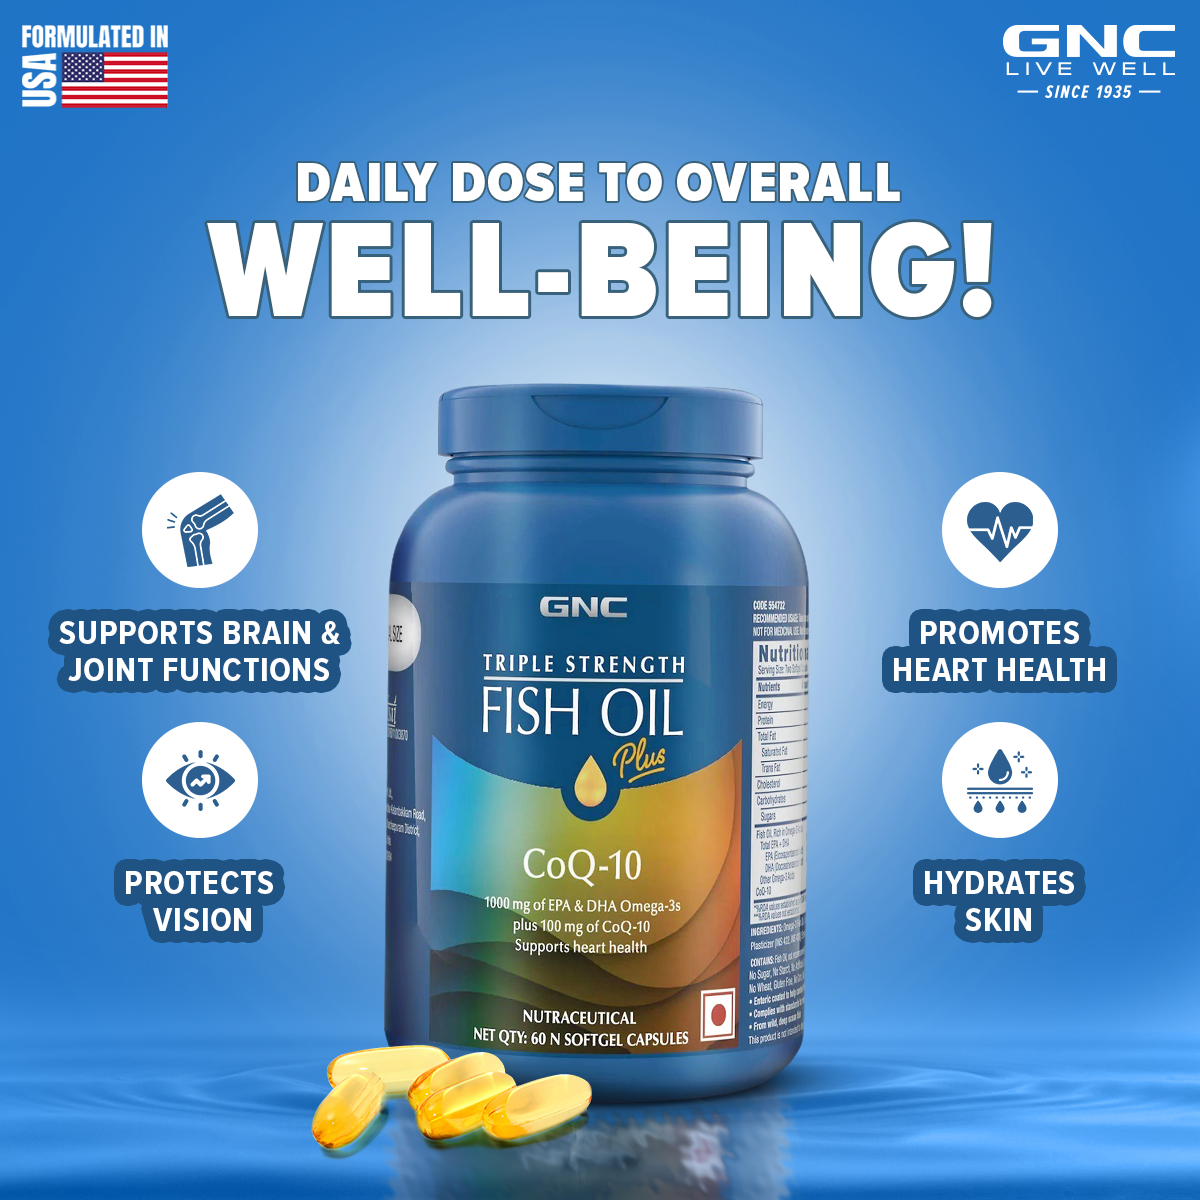 GNC Triple Strength Fish Oil Plus CoQ - 1000mg - For Heart Health, Memory & Overall Well-Being